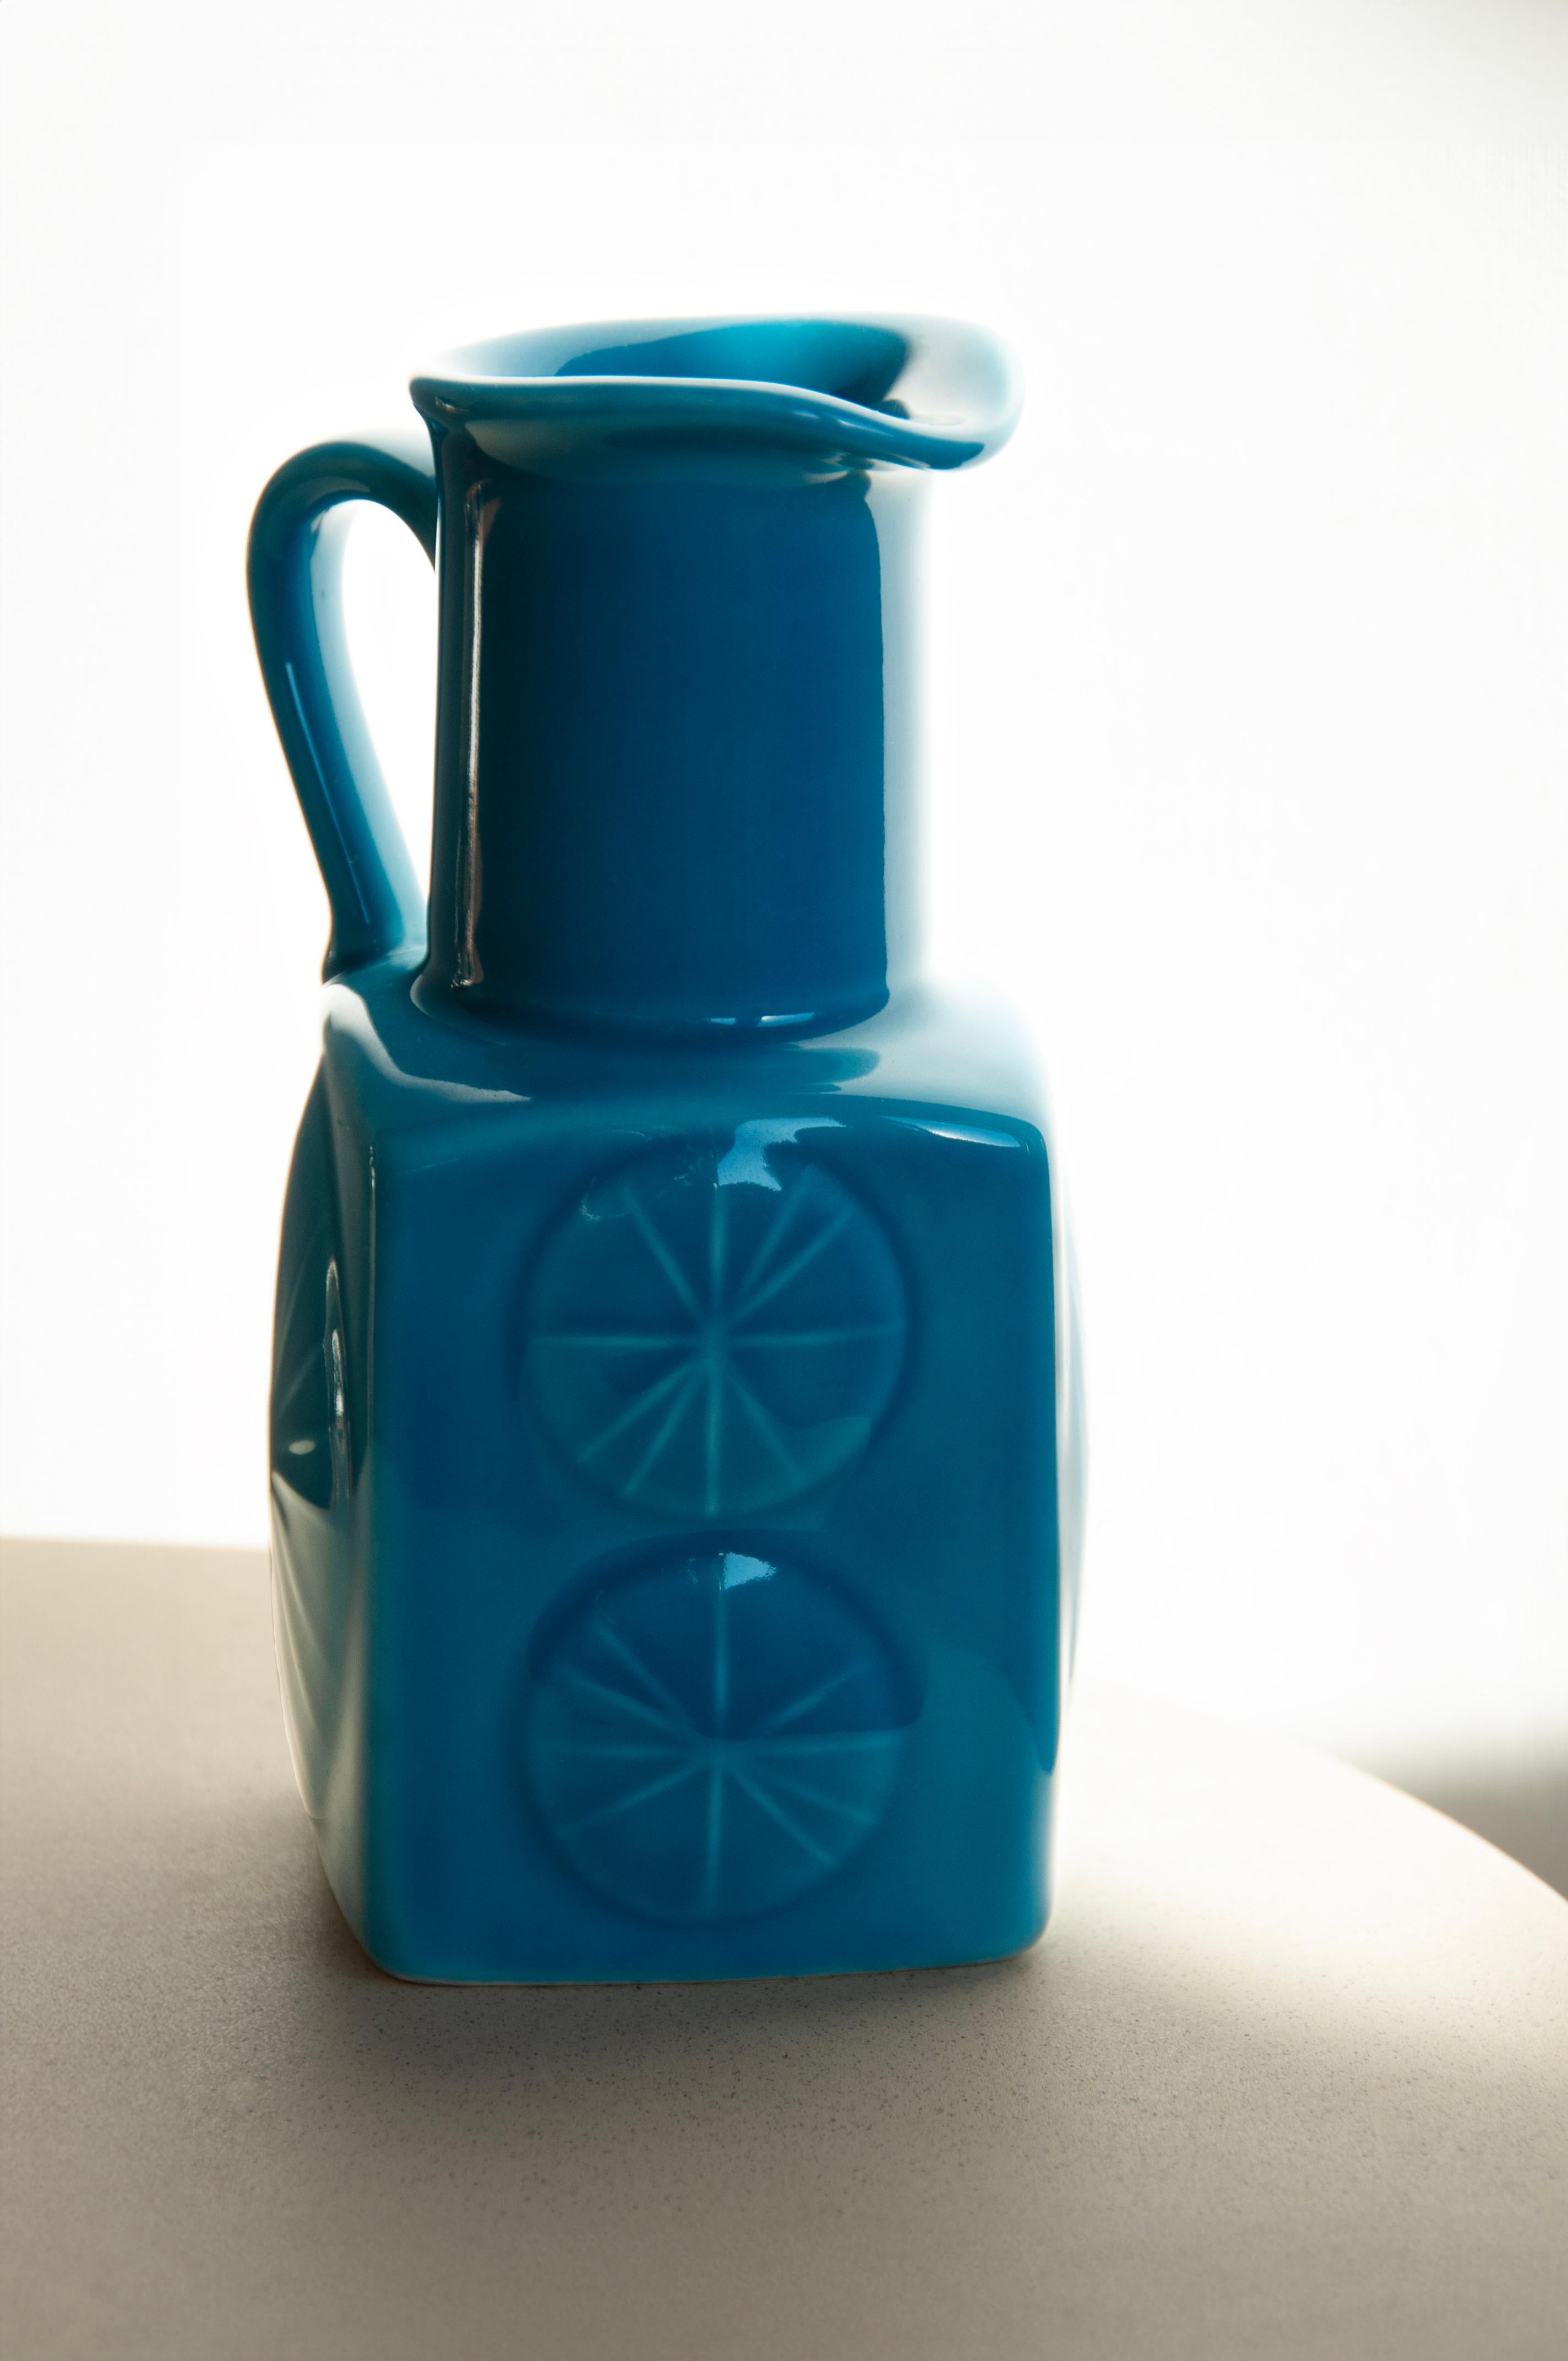 Rörstrand Vase: Carl Harry Stålhane Design, Turquoise Scandinavian Ceramic

Discover a rare gem from the 1960s: a fully glazed jug or vase crafted by the esteemed Swedish ceramist Carl Harry Stålhane. Originally designed for a Swedish route ship -